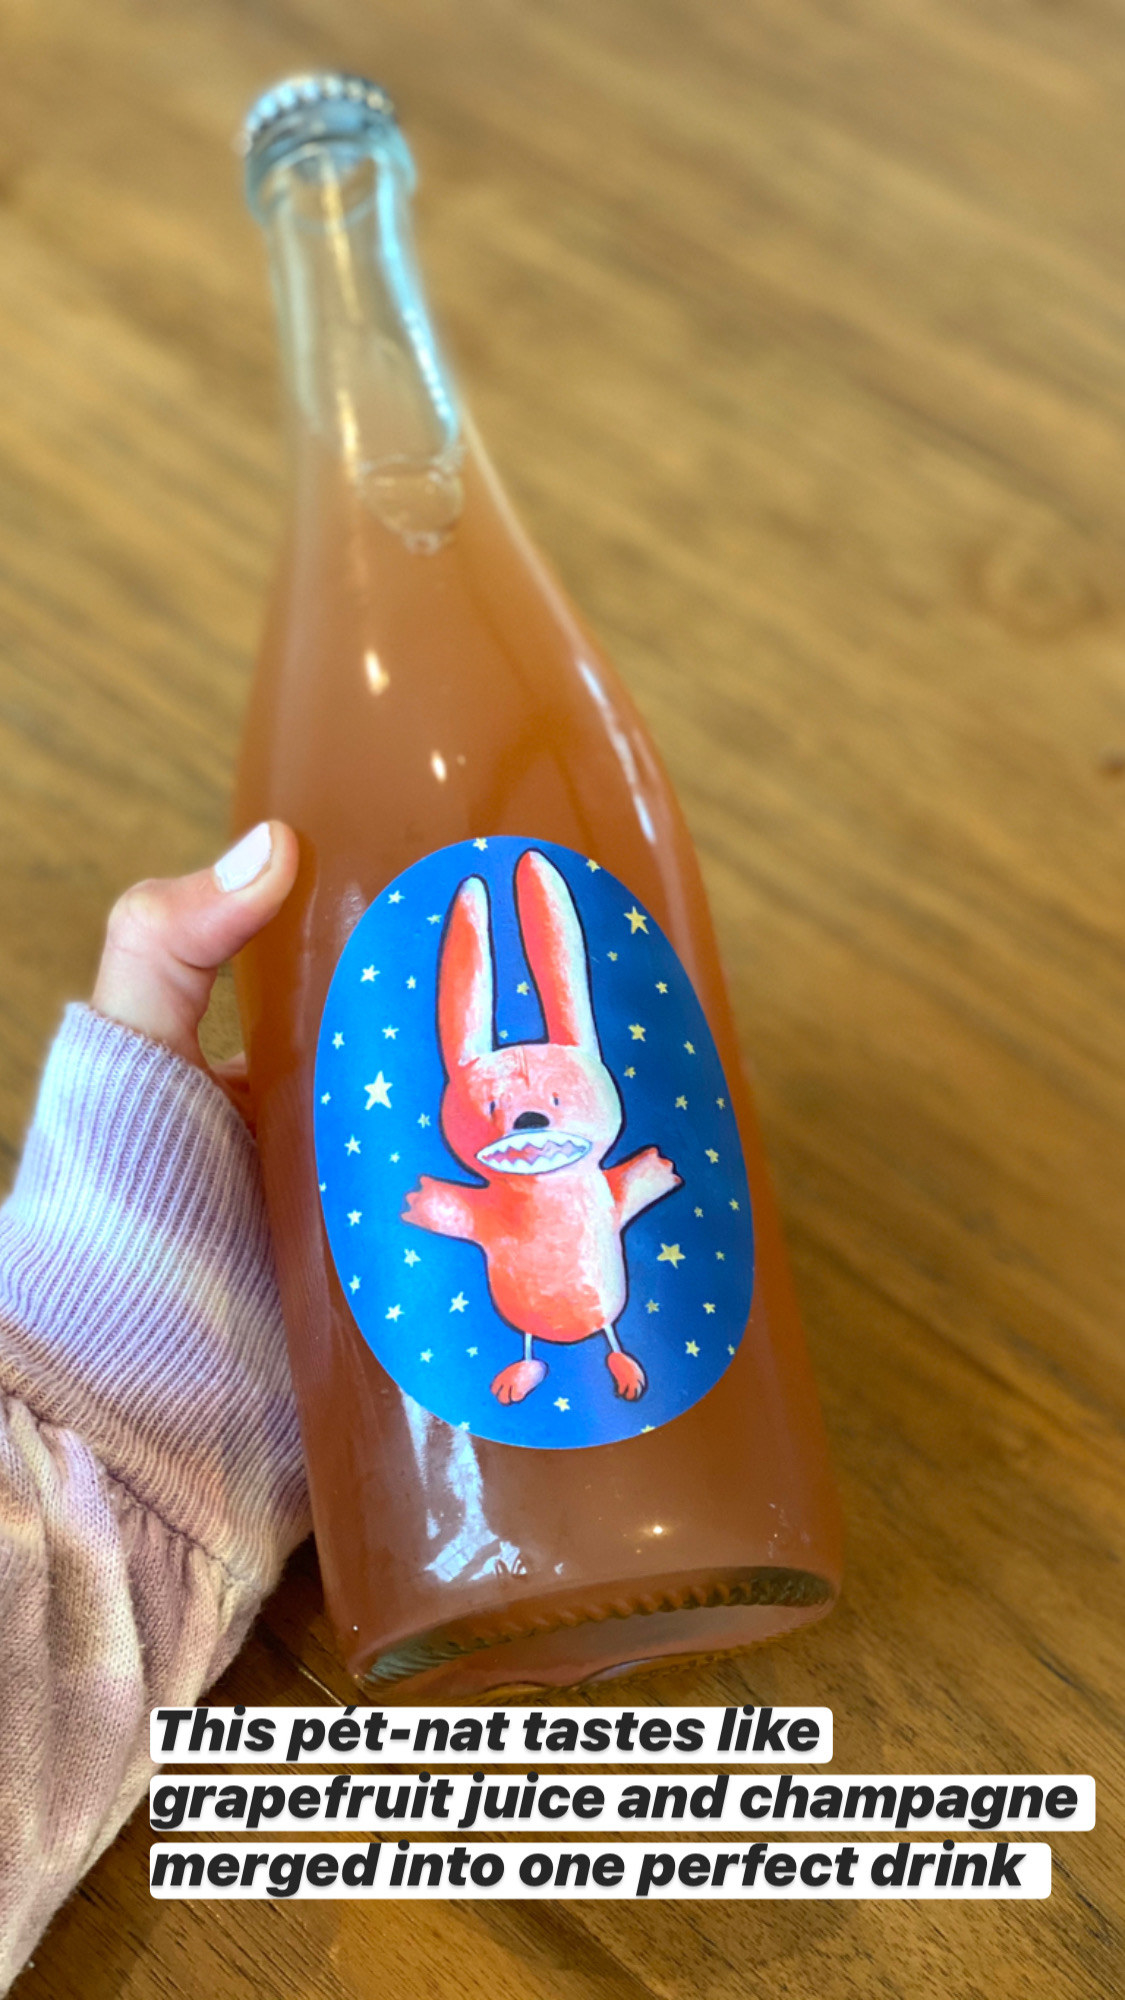 A bottle of peach-colored pét-nat wine with a bunny on its label.